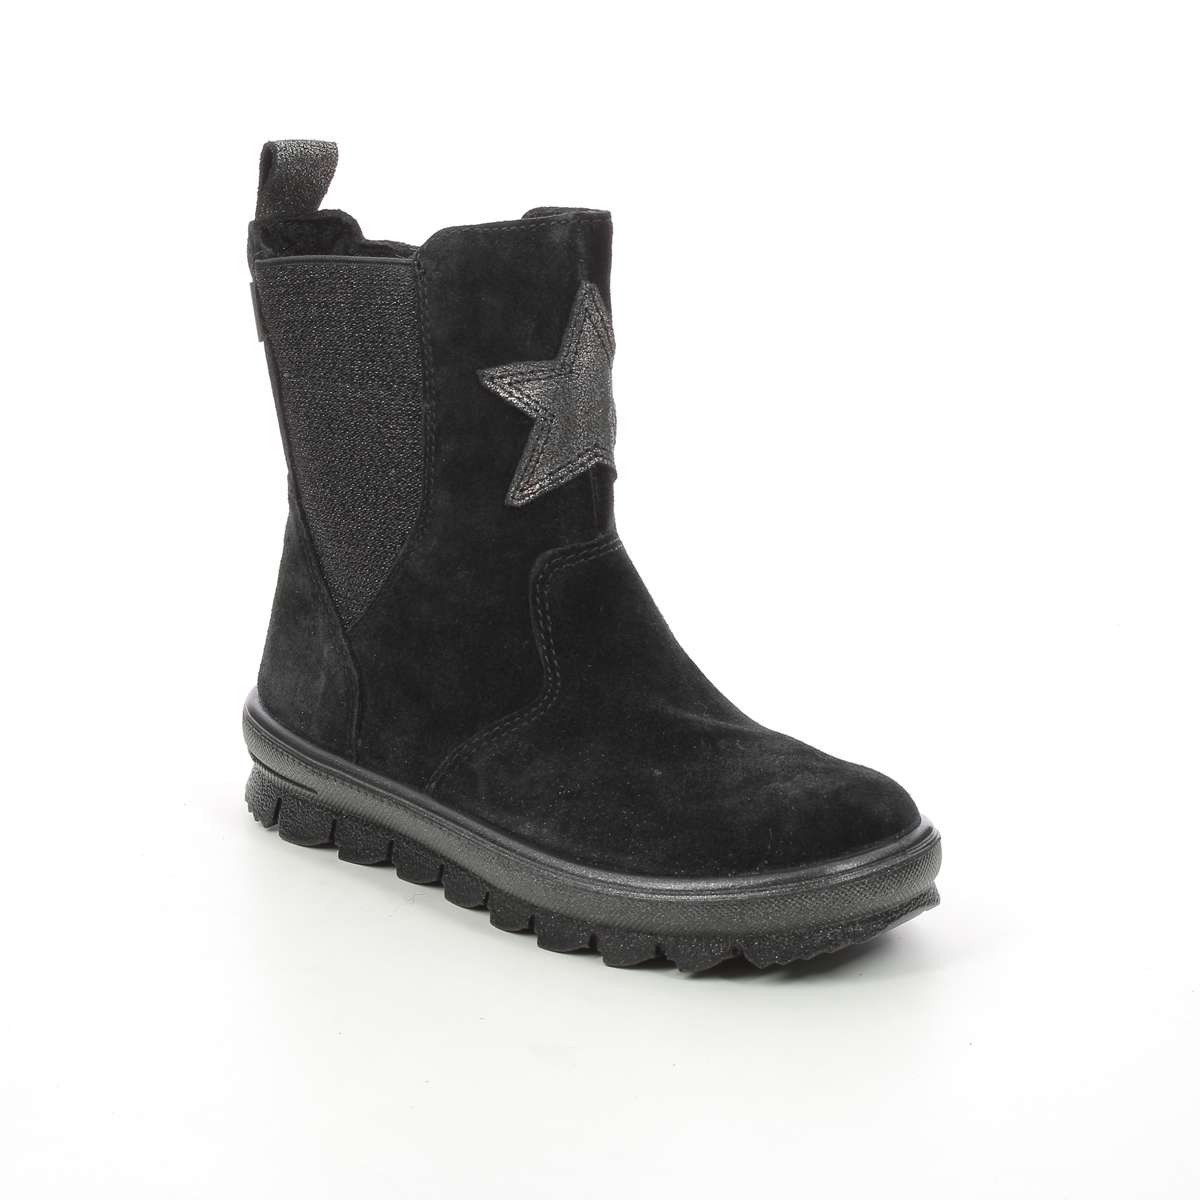 Superfit Flavia Star Gtx Black Suede Kids Girls Boots 1000217-0000 In Size 26 In Plain Black Suede For kids